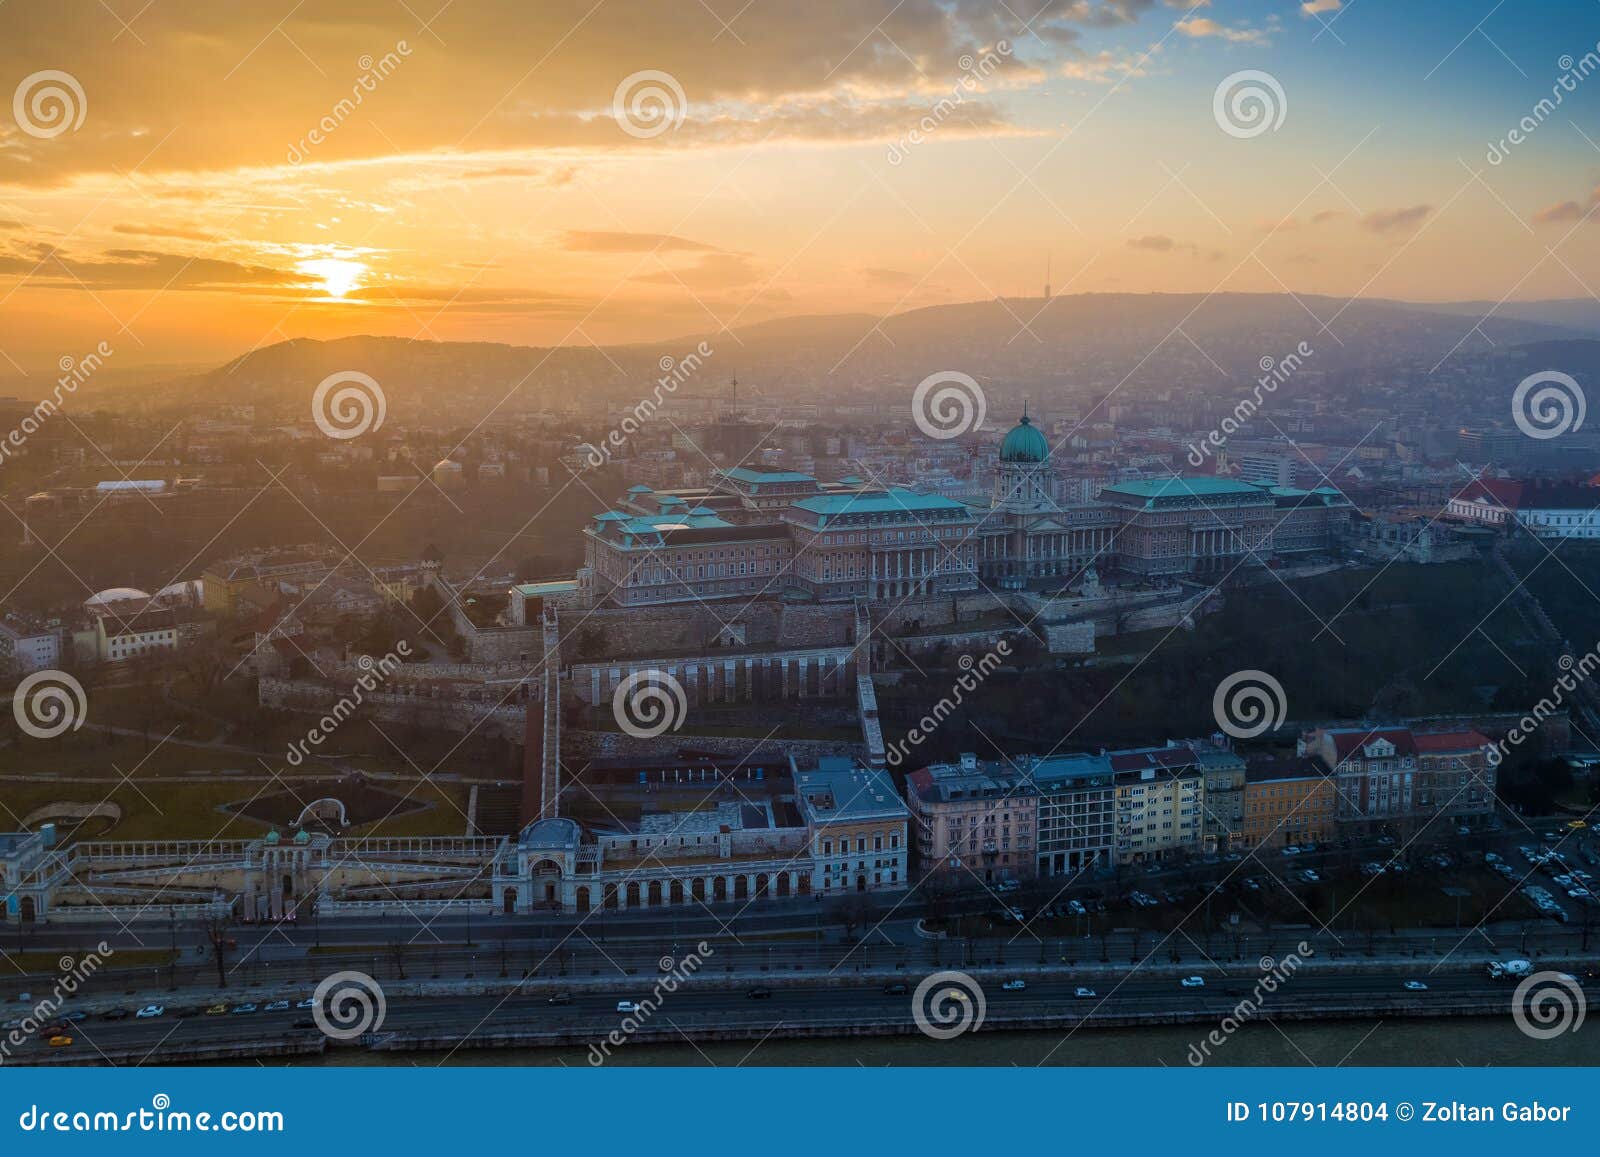 budapest, hungary - aerial sunset view of buda castle royal palace and varkert bazar